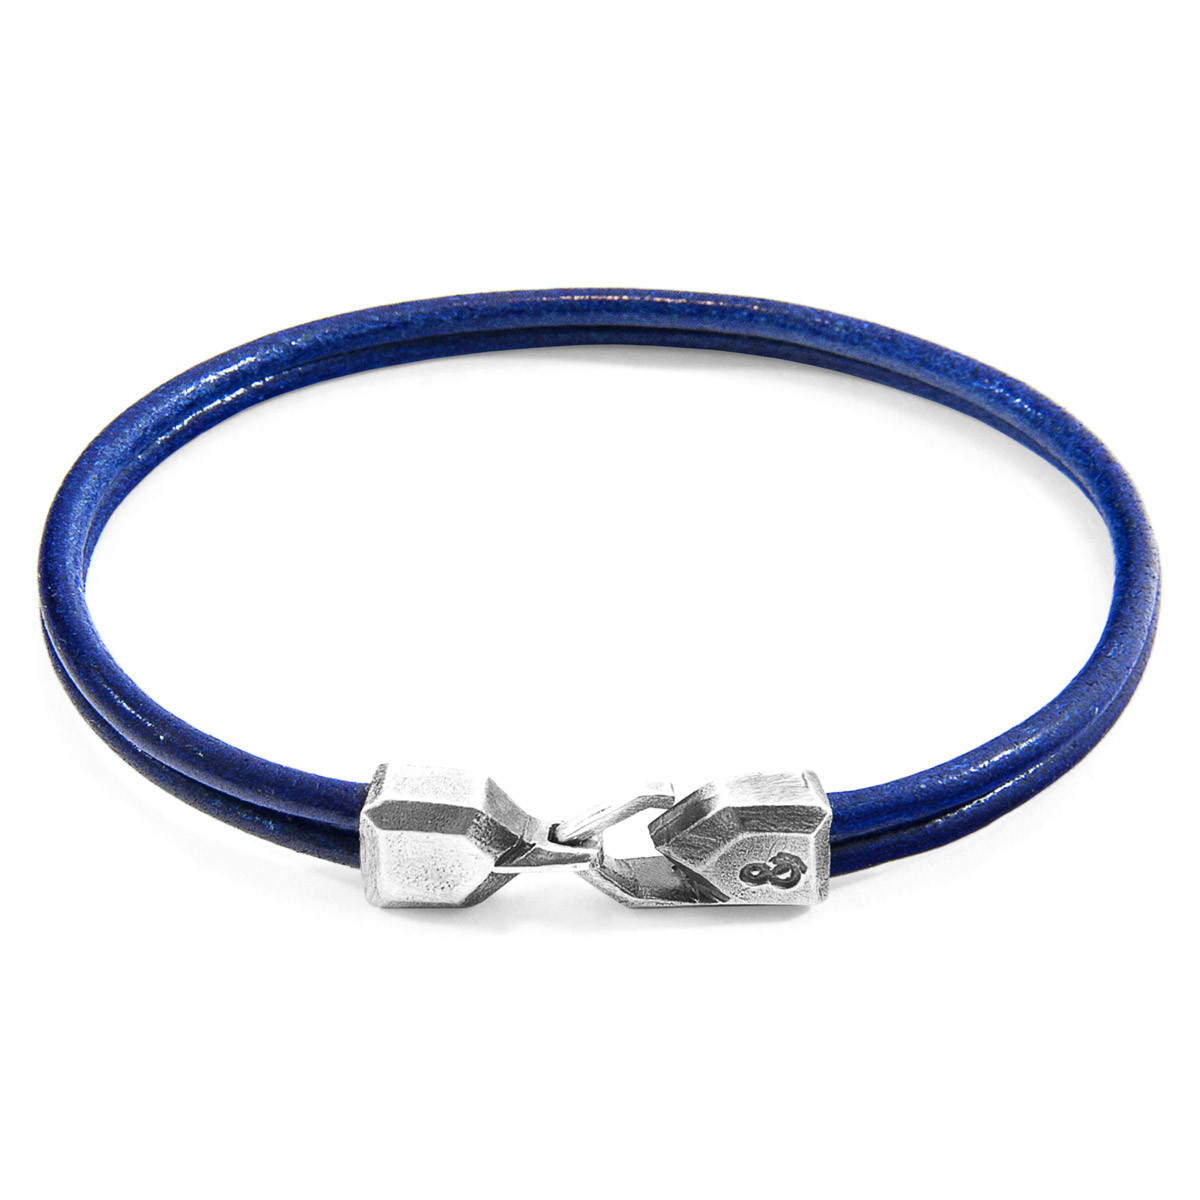 Azure Blue Cromer Silver and Round Leather Bracelet